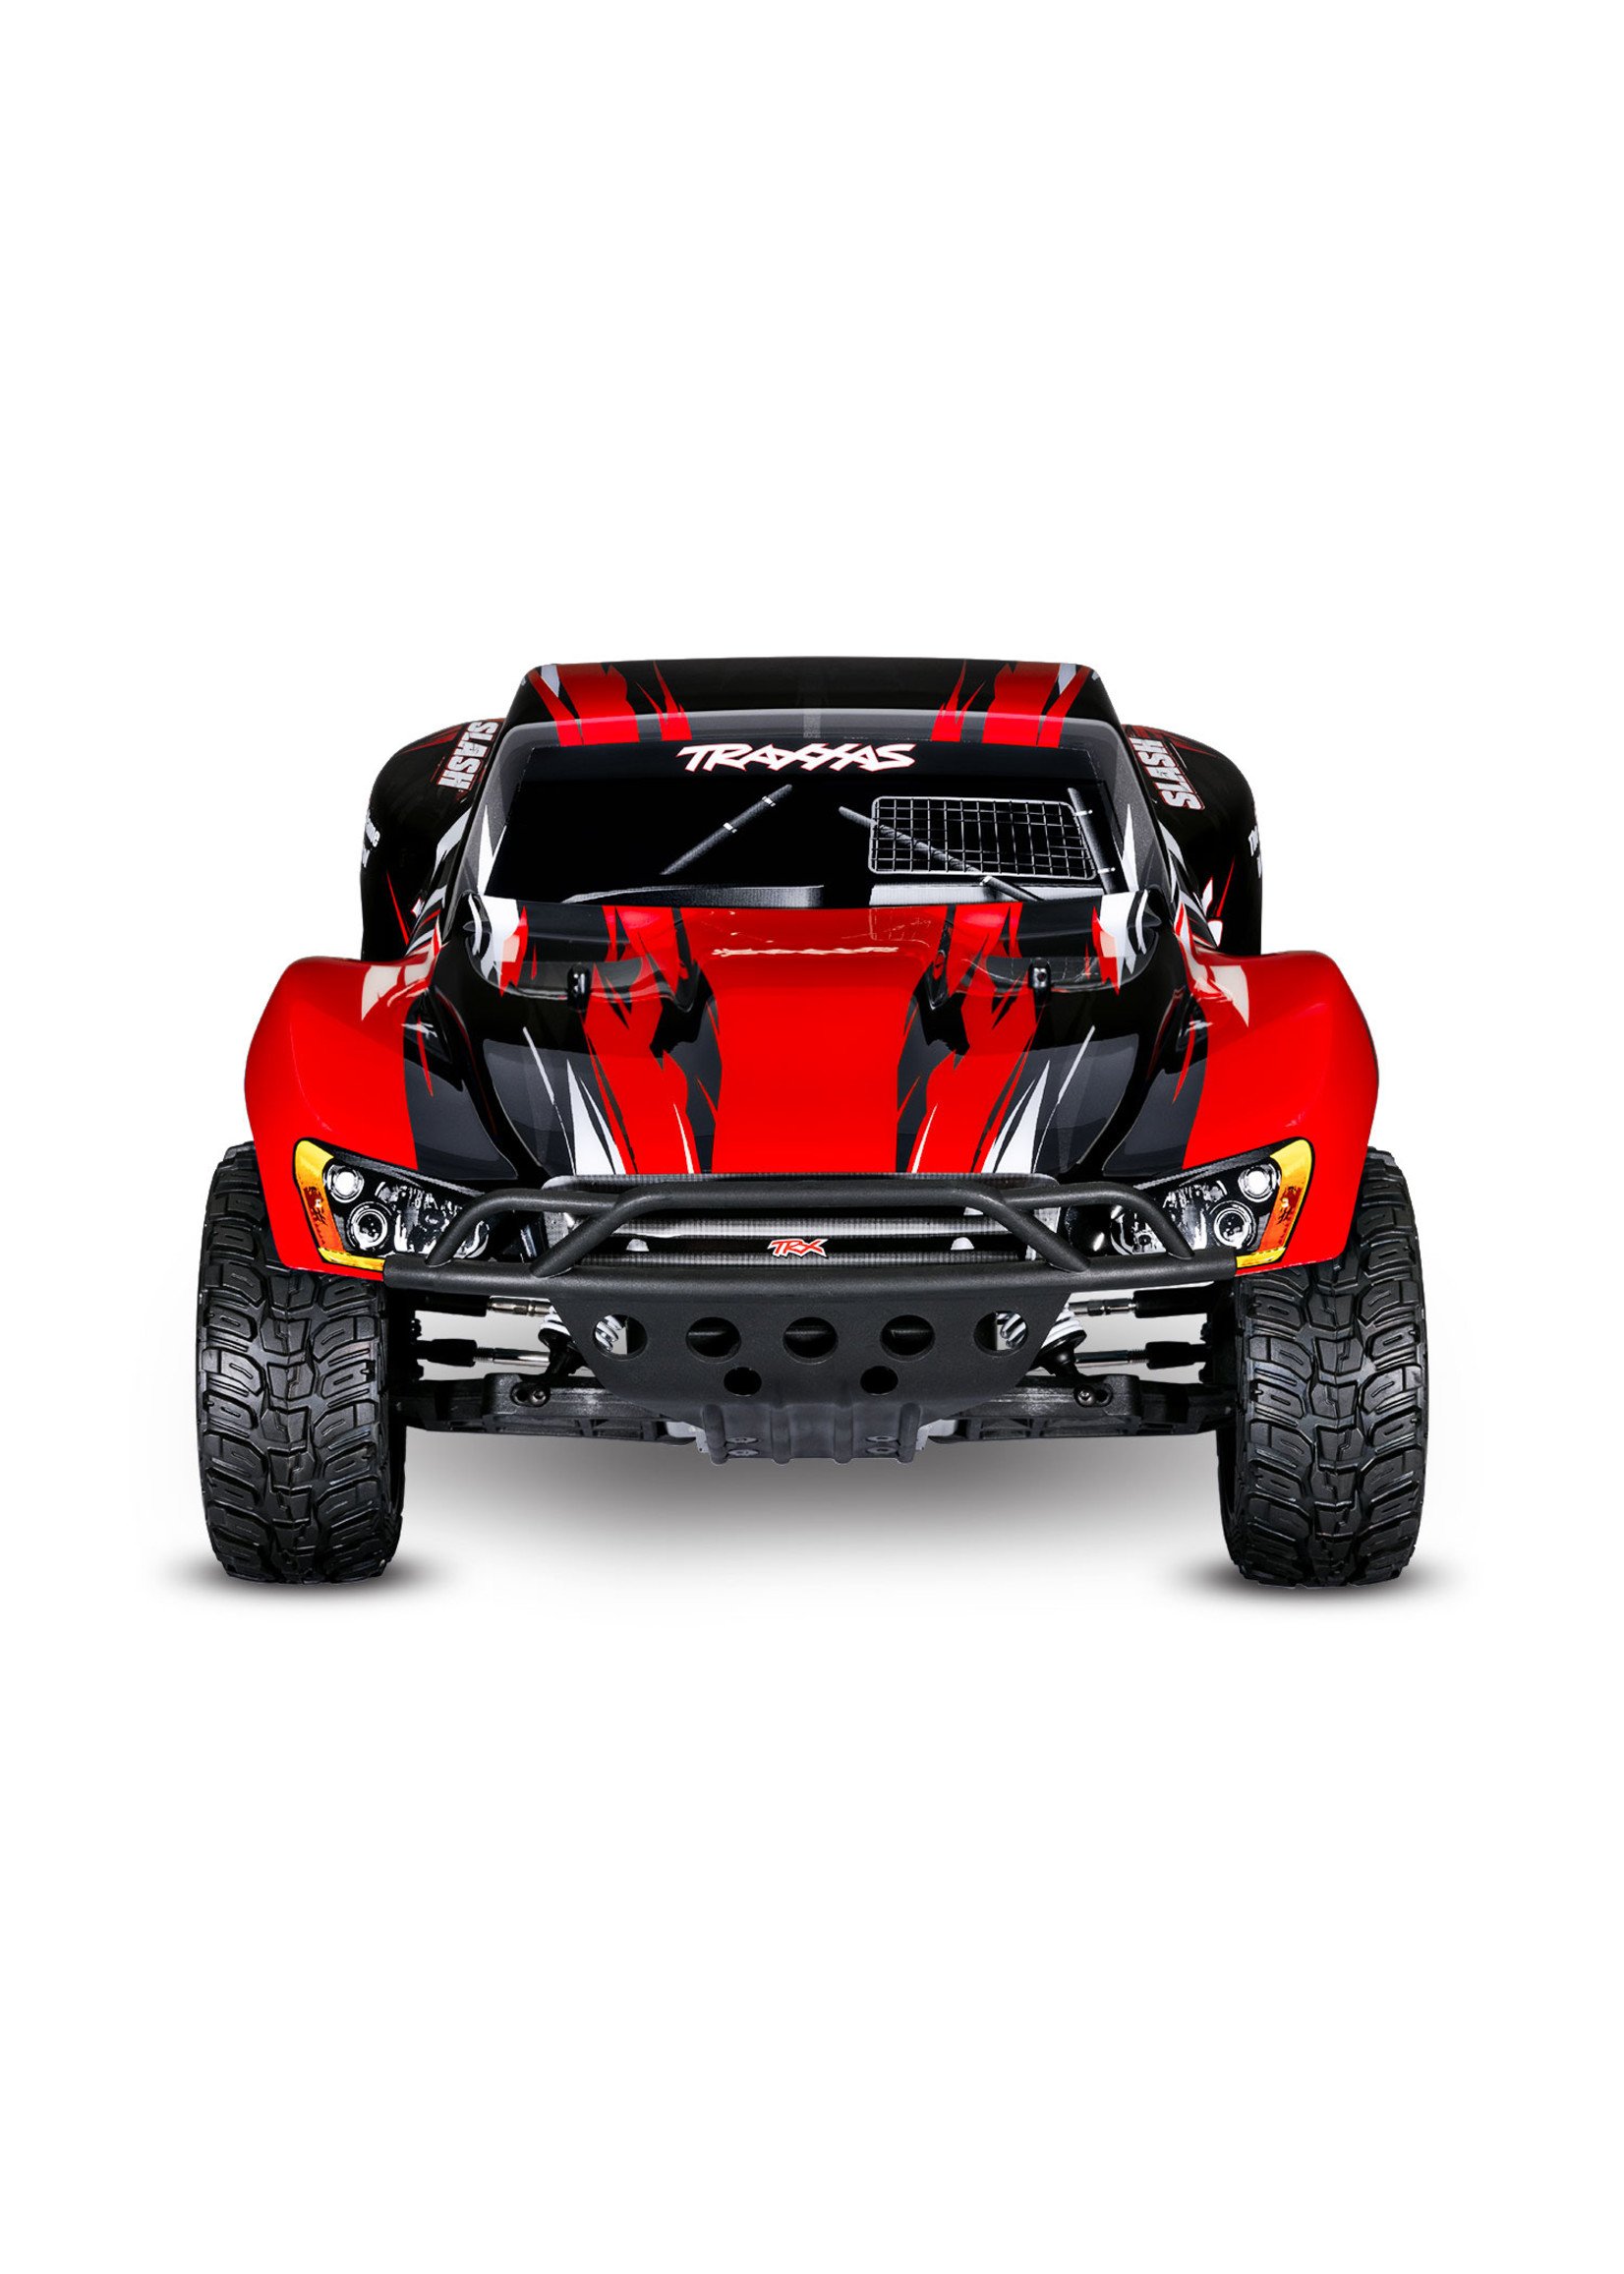 Traxxas 58024REDR - 1/10 Slash 2WD RTR Short Course Truck - Red